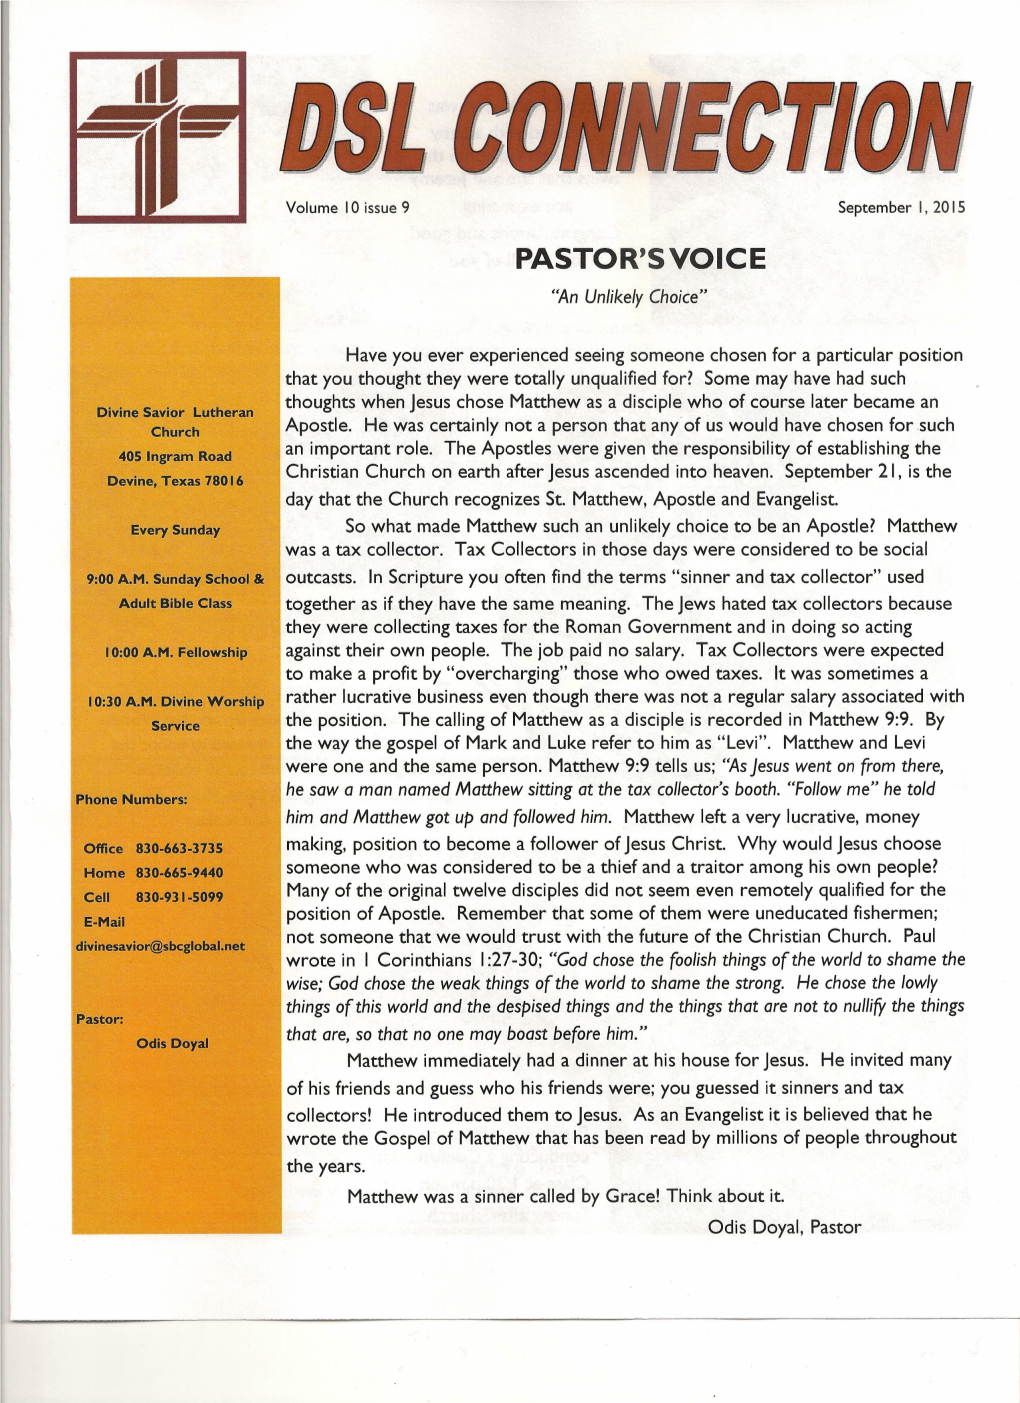 PASTOR's VOICE "An Unlikely Choice"